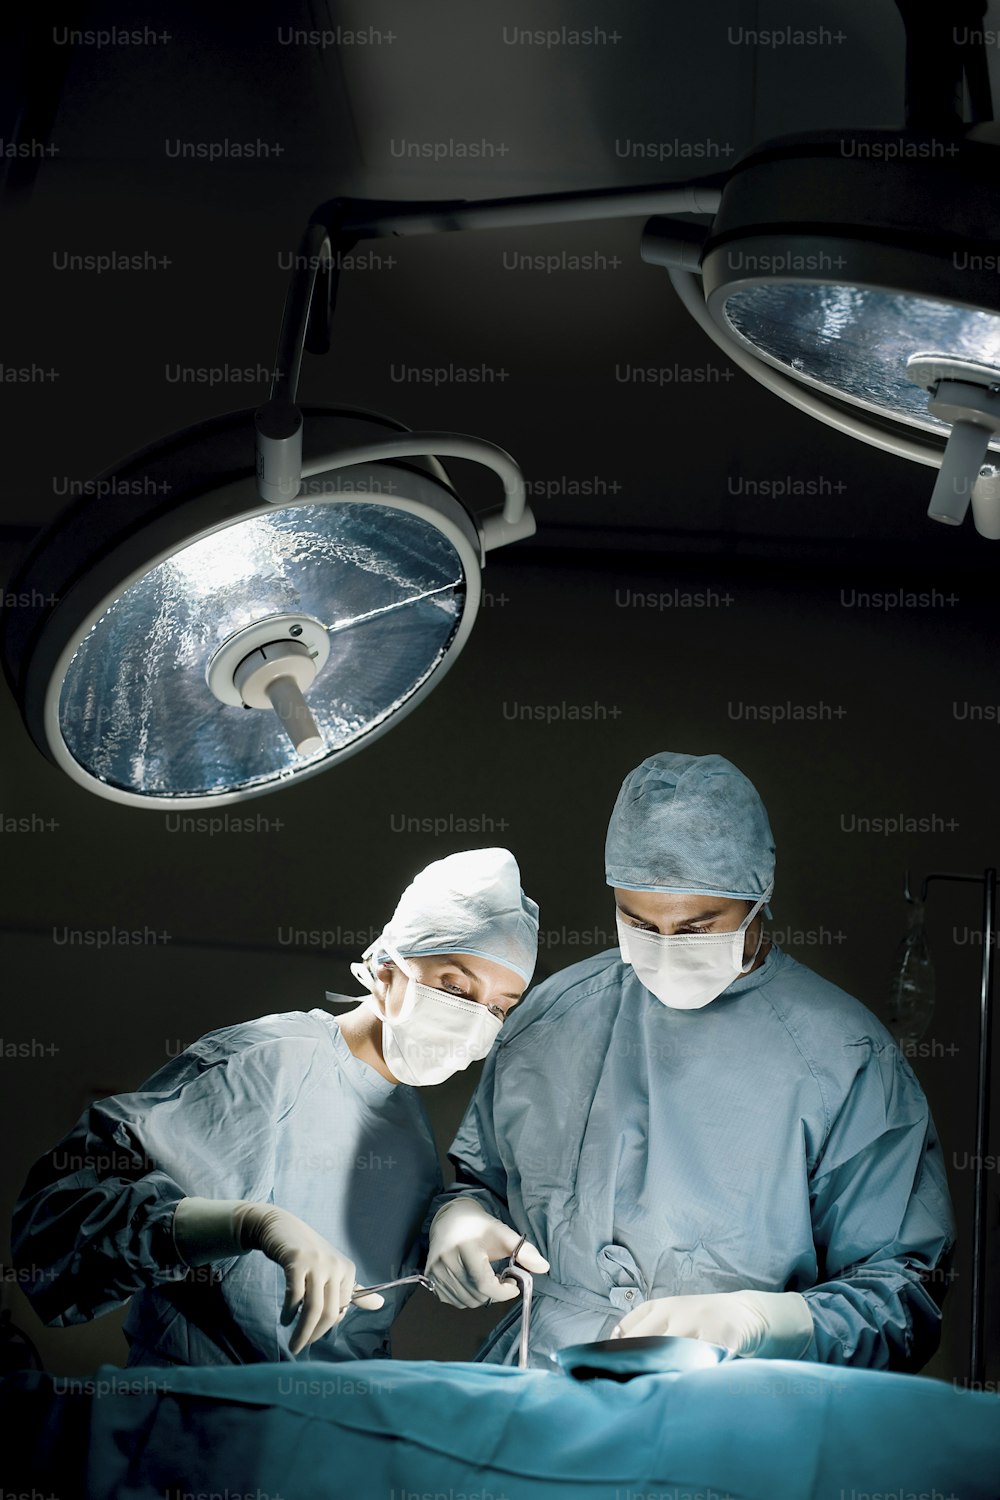 two surgeons operating on a patient in a operating room